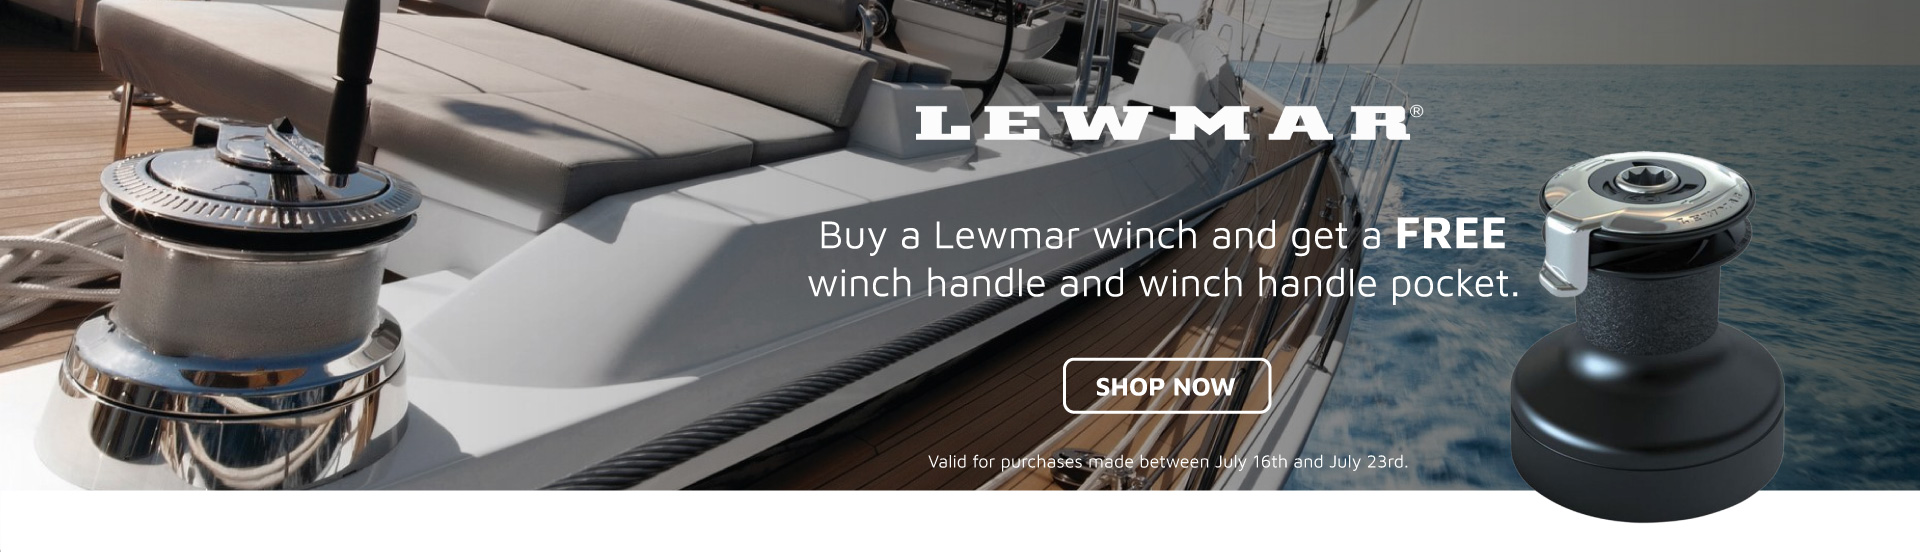 Buy Lewmar Winch and get a One Touch Handle and Winch Handle Pocket for Free